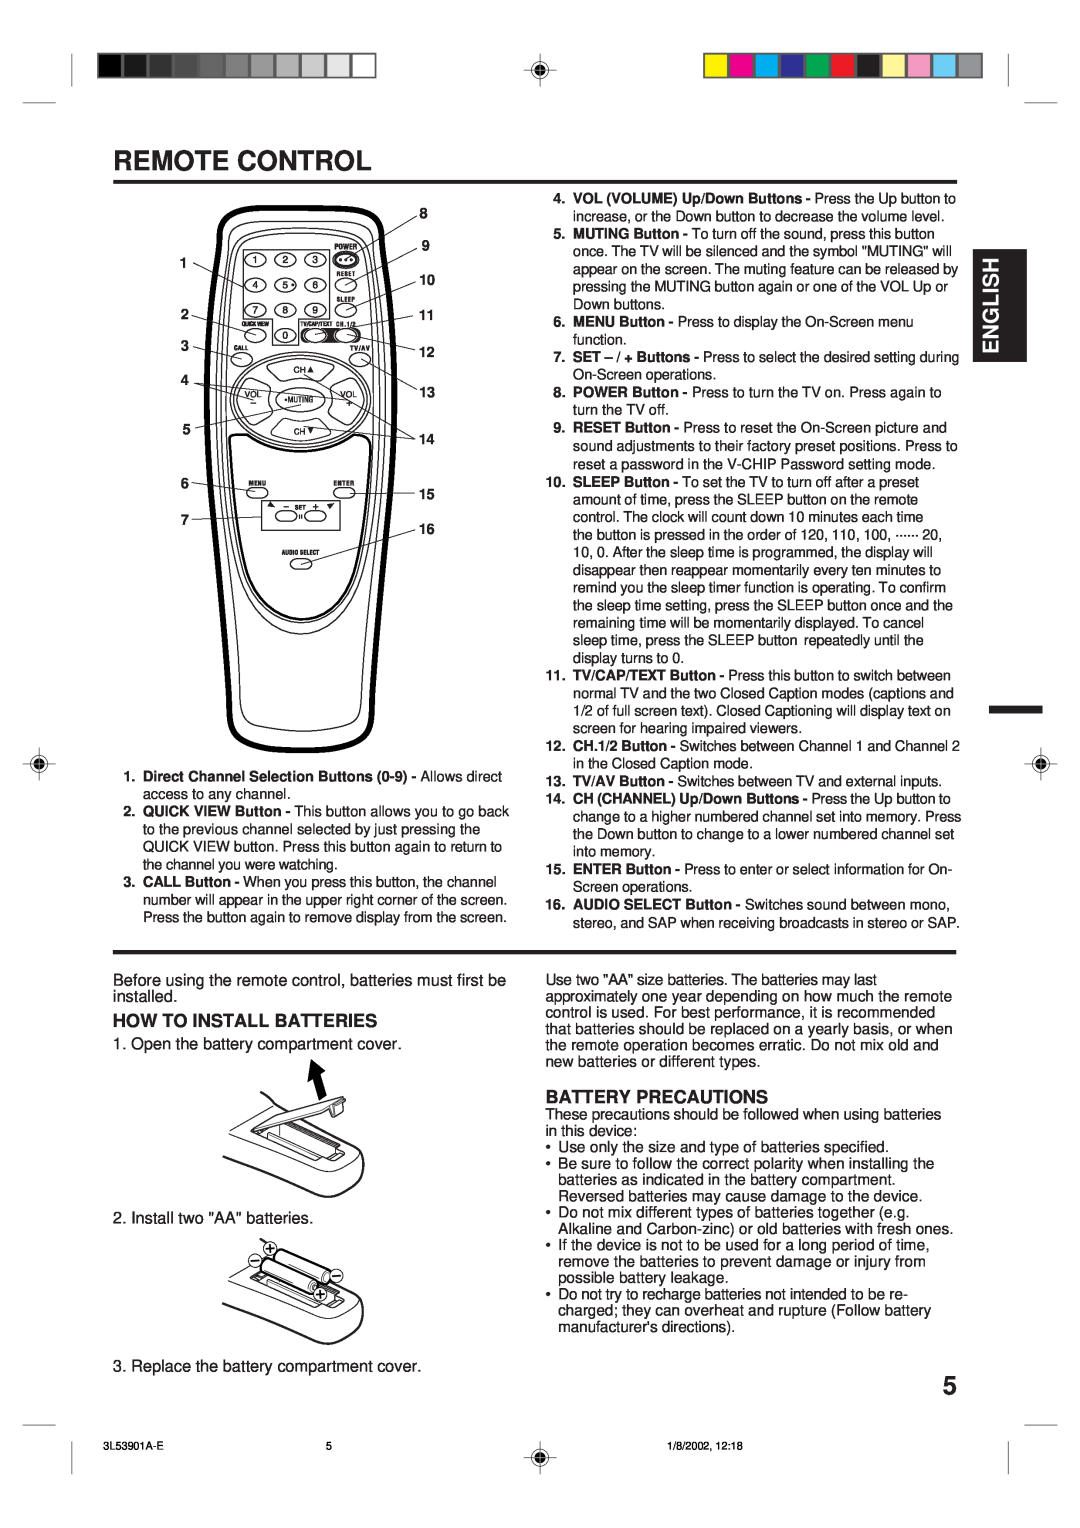 Memorex MT2272 owner manual Remote Control, How To Install Batteries, Battery Precautions, English 